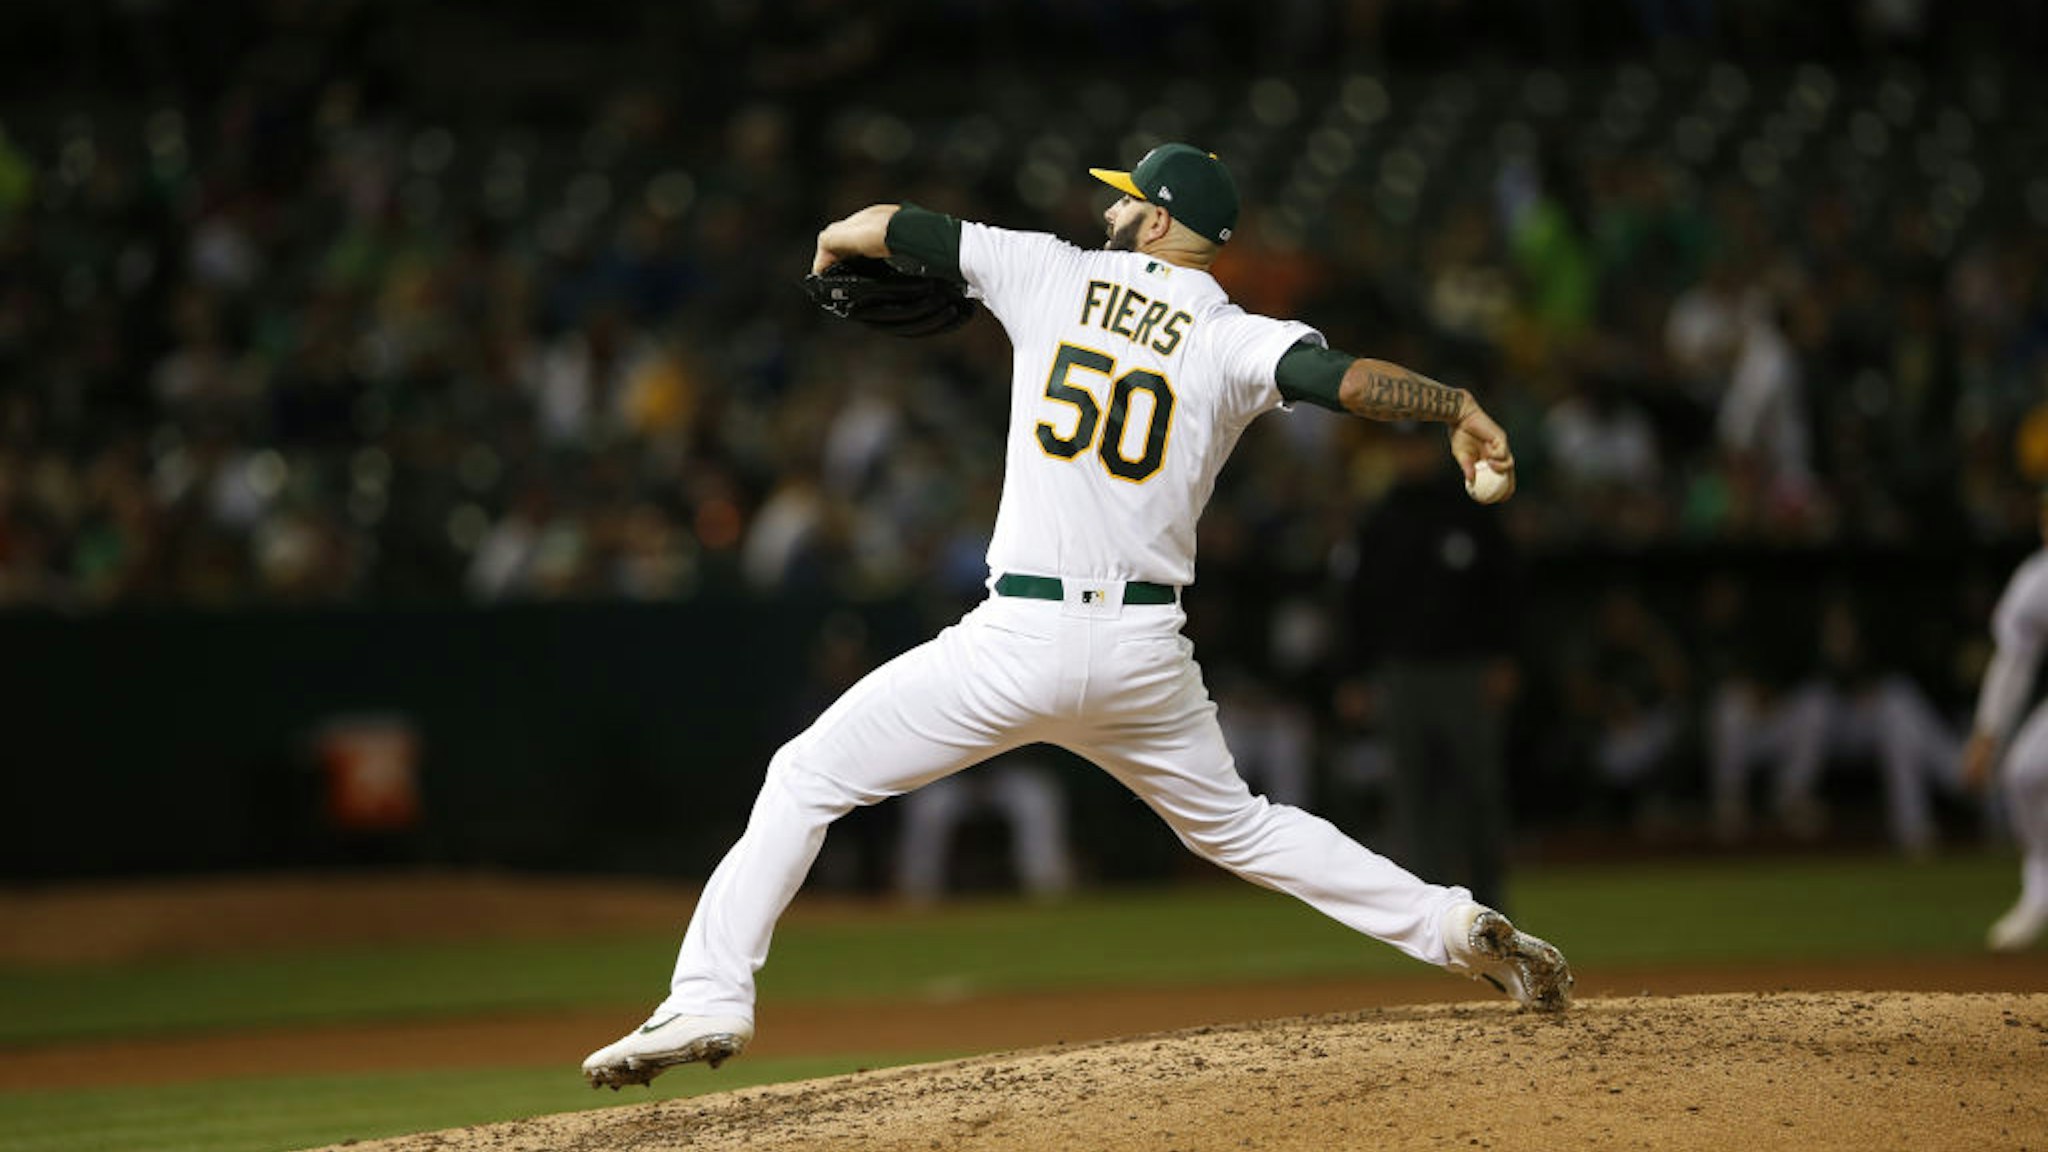 Mike Fiers #50 of the Oakland Athletics pitches during the game against the New York Yankees at the Oakland-Alameda County Coliseum on August 21, 2019 in Oakland, California.